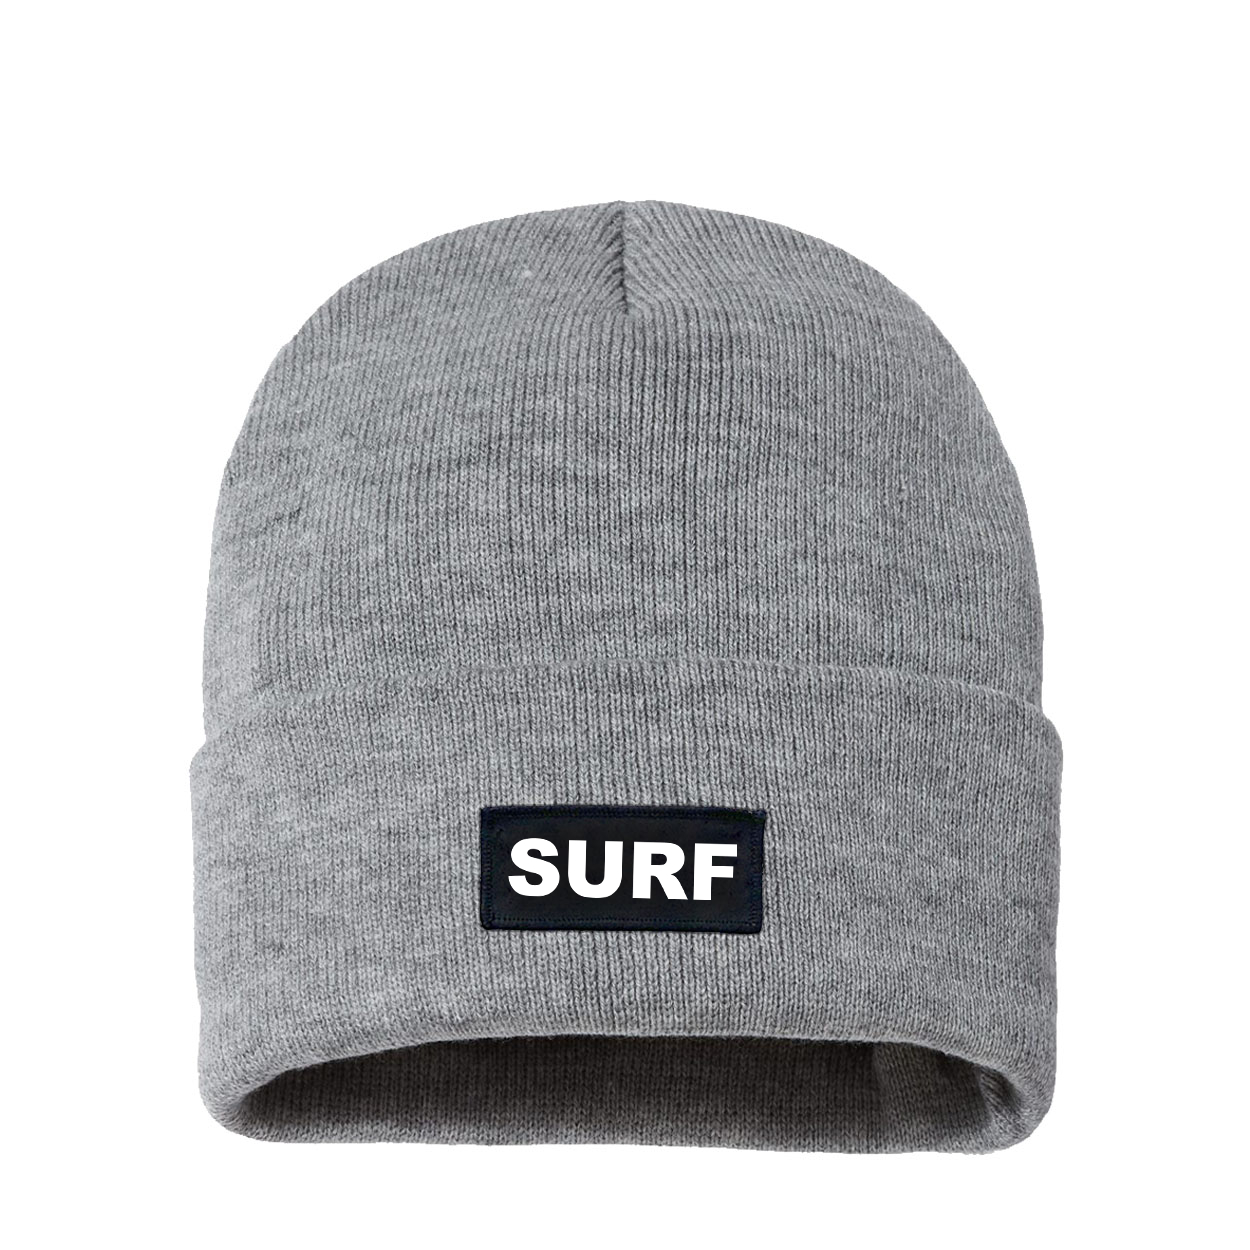 Surf Brand Logo Night Out Woven Patch Sherpa Lined Cuffed Beanie Heather Gray (White Logo)